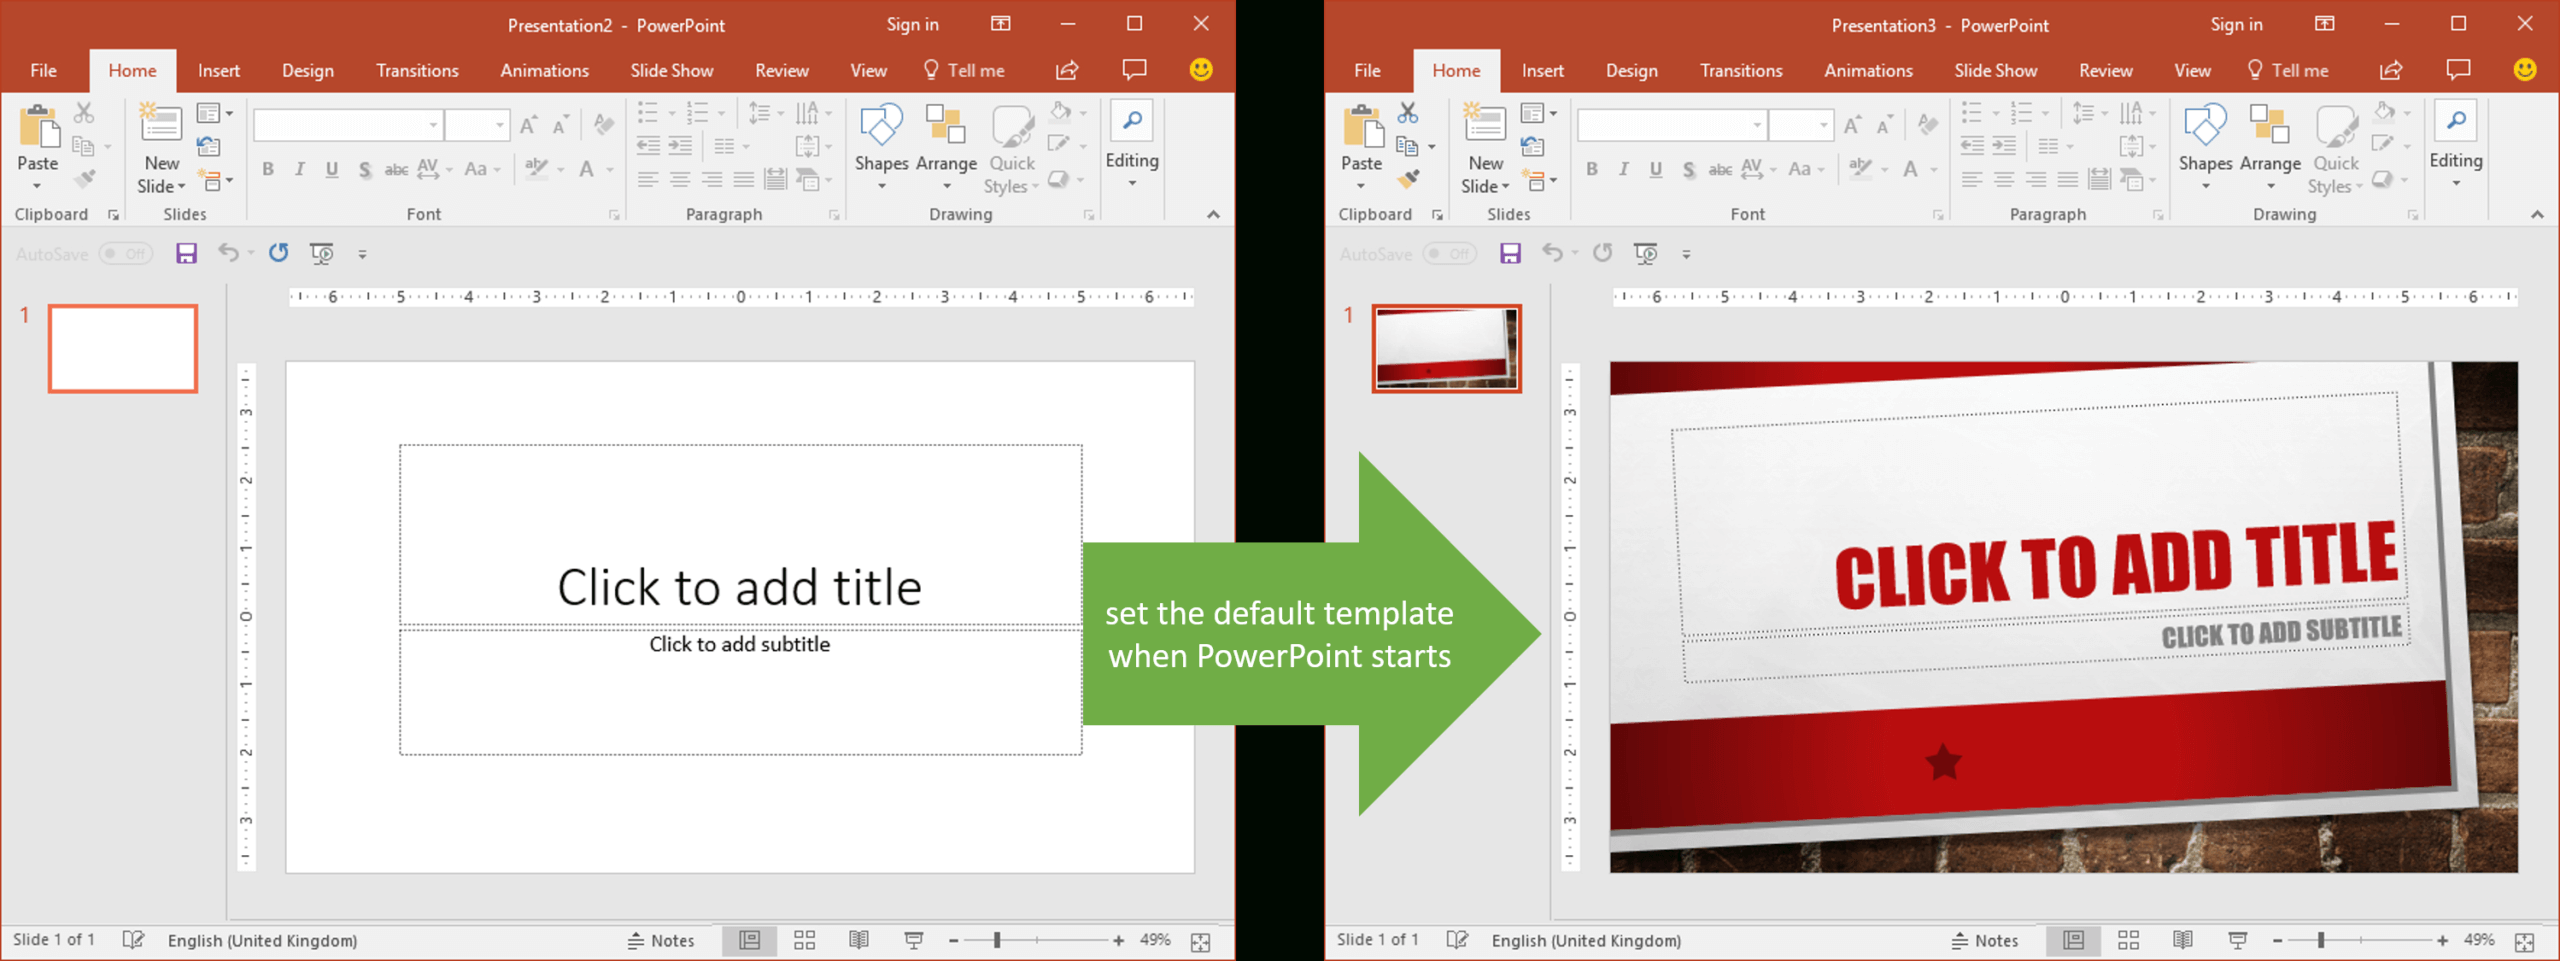 Set The Default Template When Powerpoint Starts | Youpresent For Change Template In Powerpoint